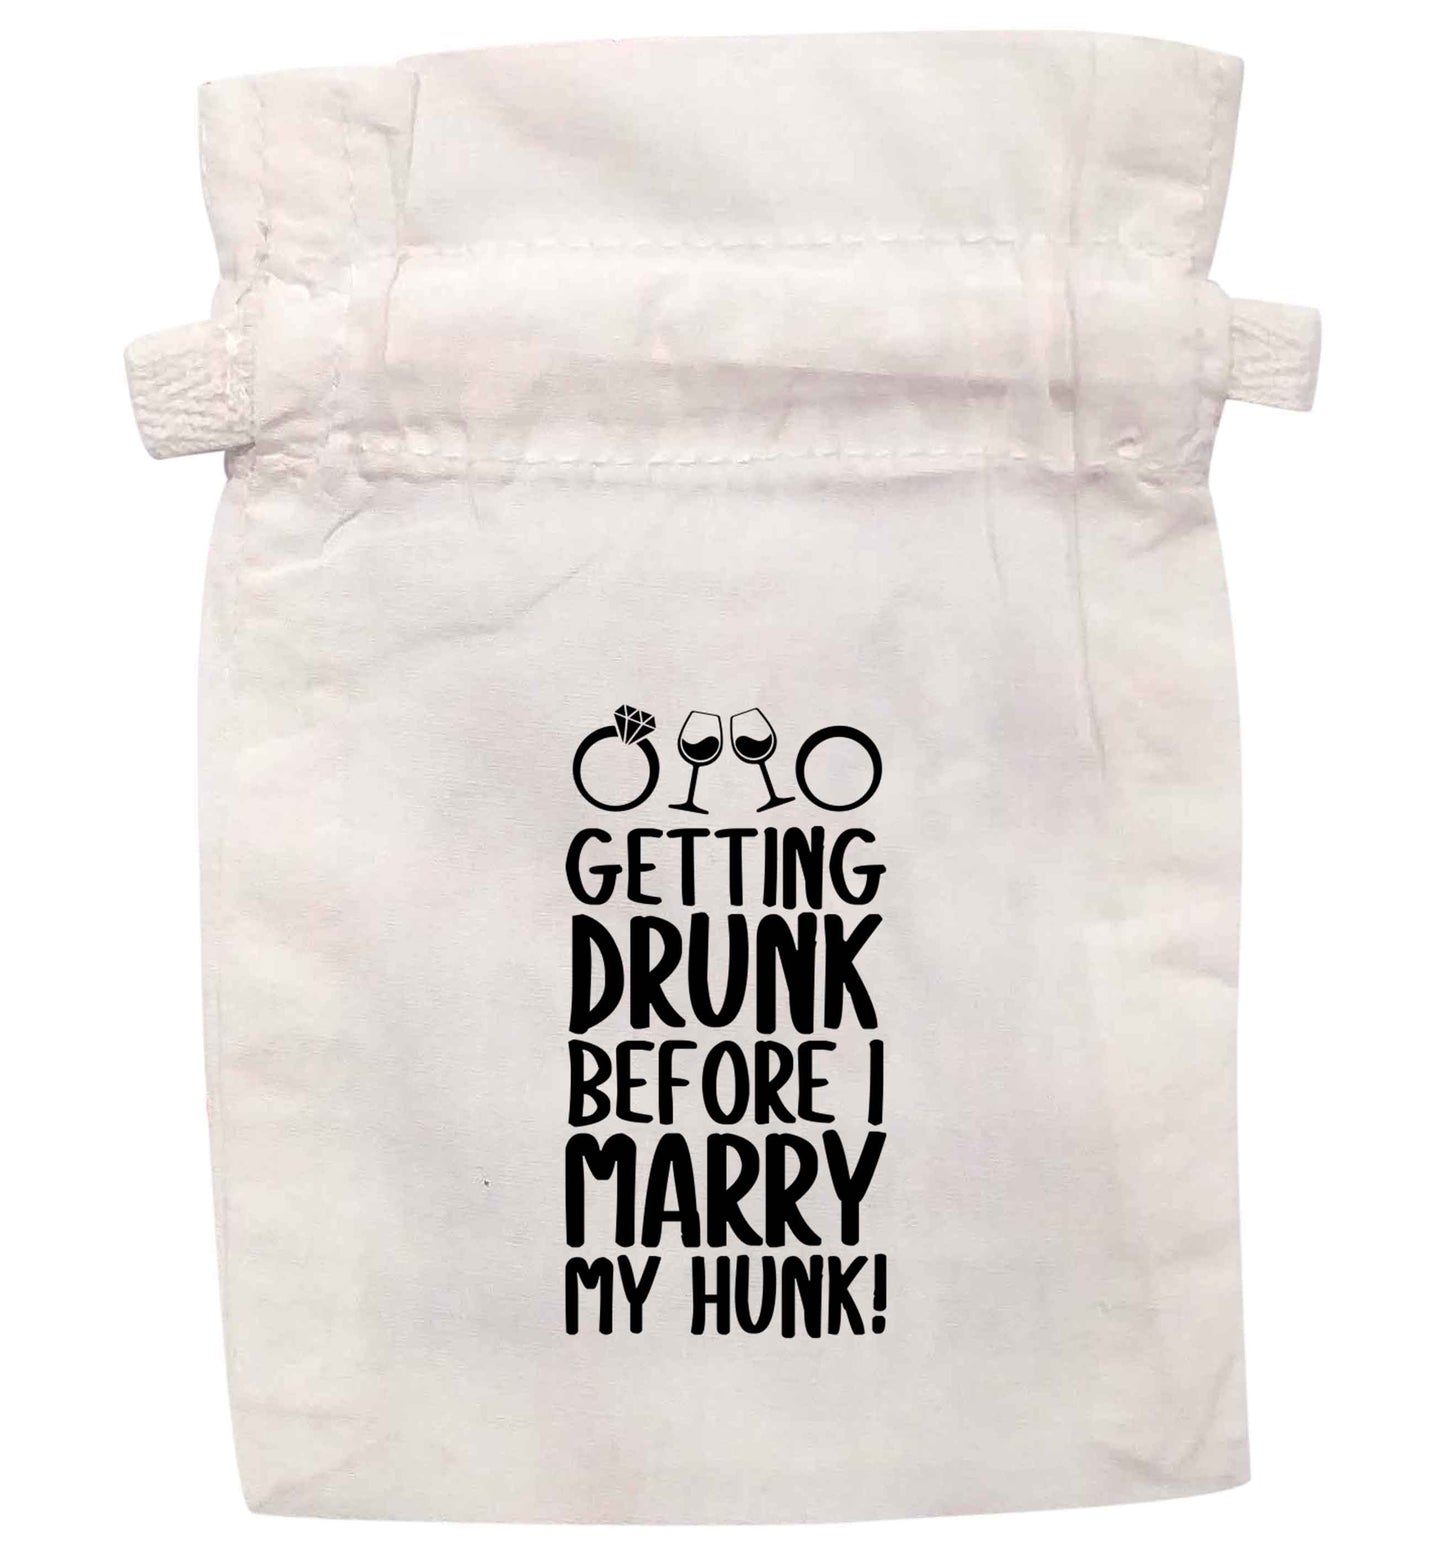 Getting drunk before I marry my hunk | XS - L | Pouch / Drawstring bag / Sack | Organic Cotton | Bulk discounts available!